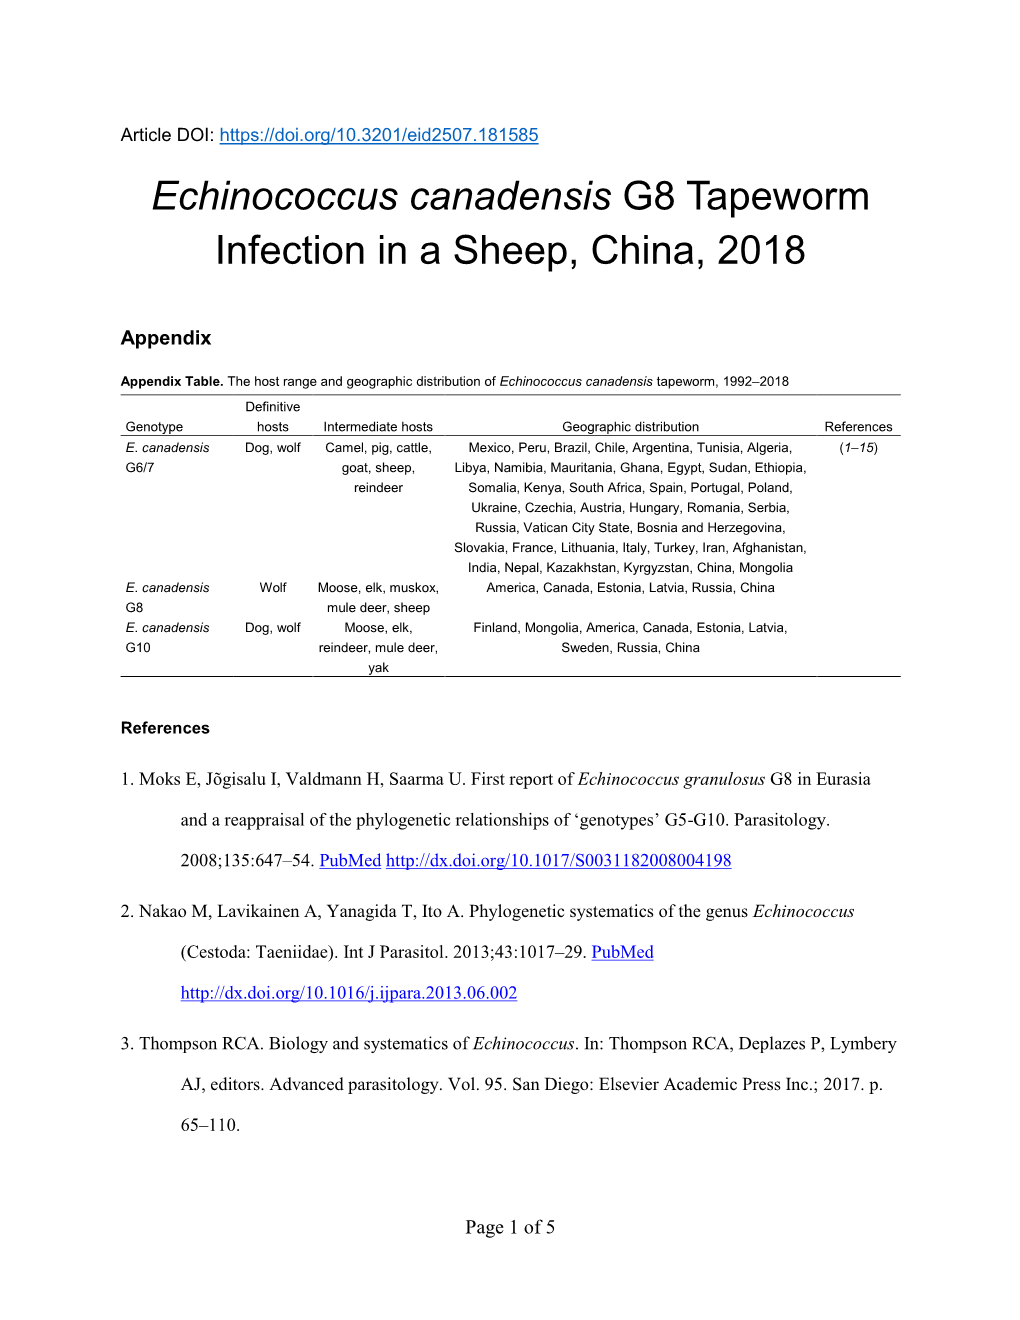 Echinococcus Canadensis G8 Tapeworm Infection in a Sheep, China, 2018